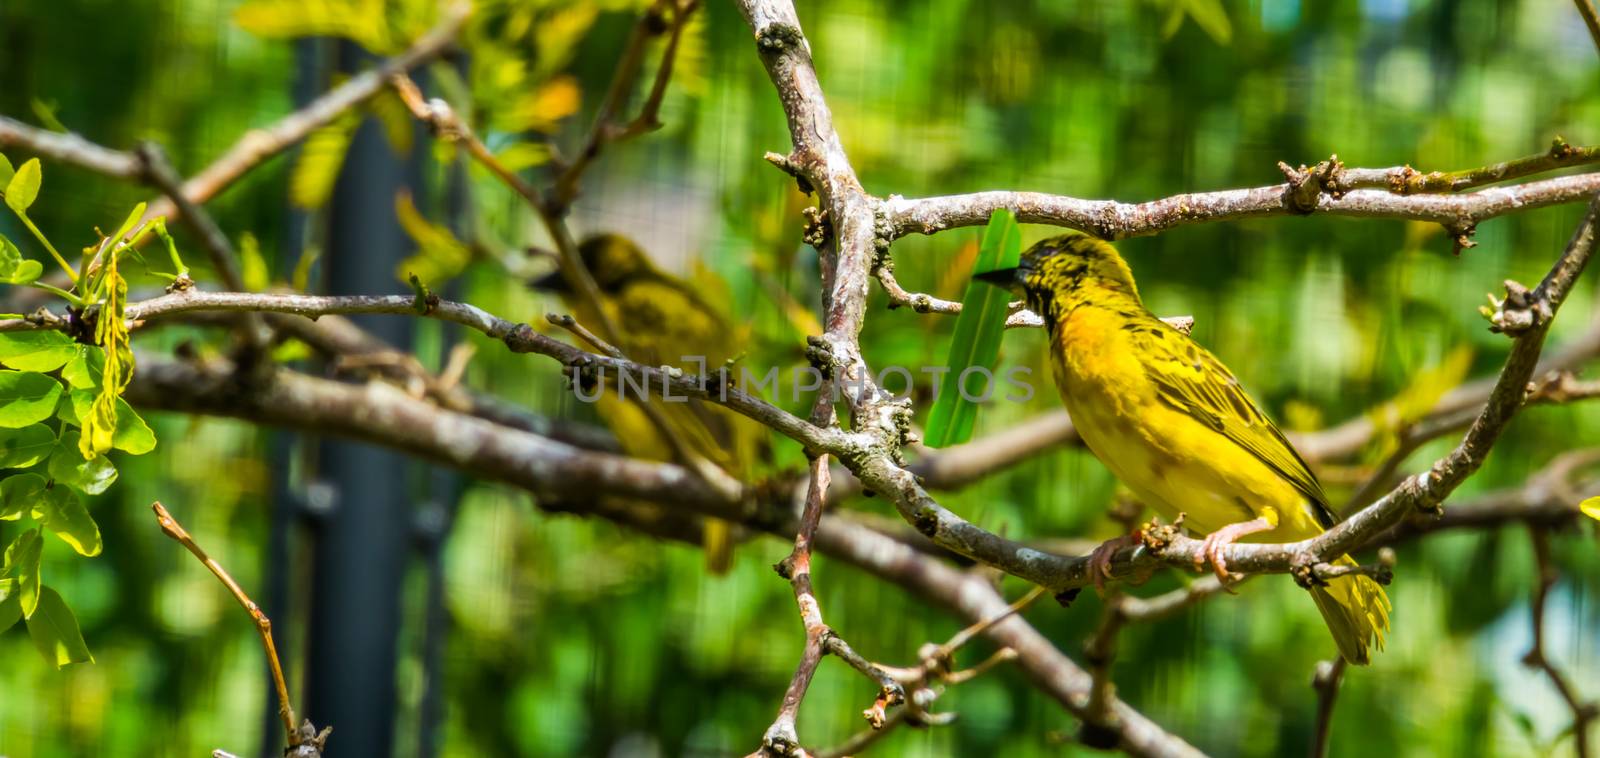 male village weaver bird sitting in a tree, popular and colorful bird specie from Africa by charlottebleijenberg